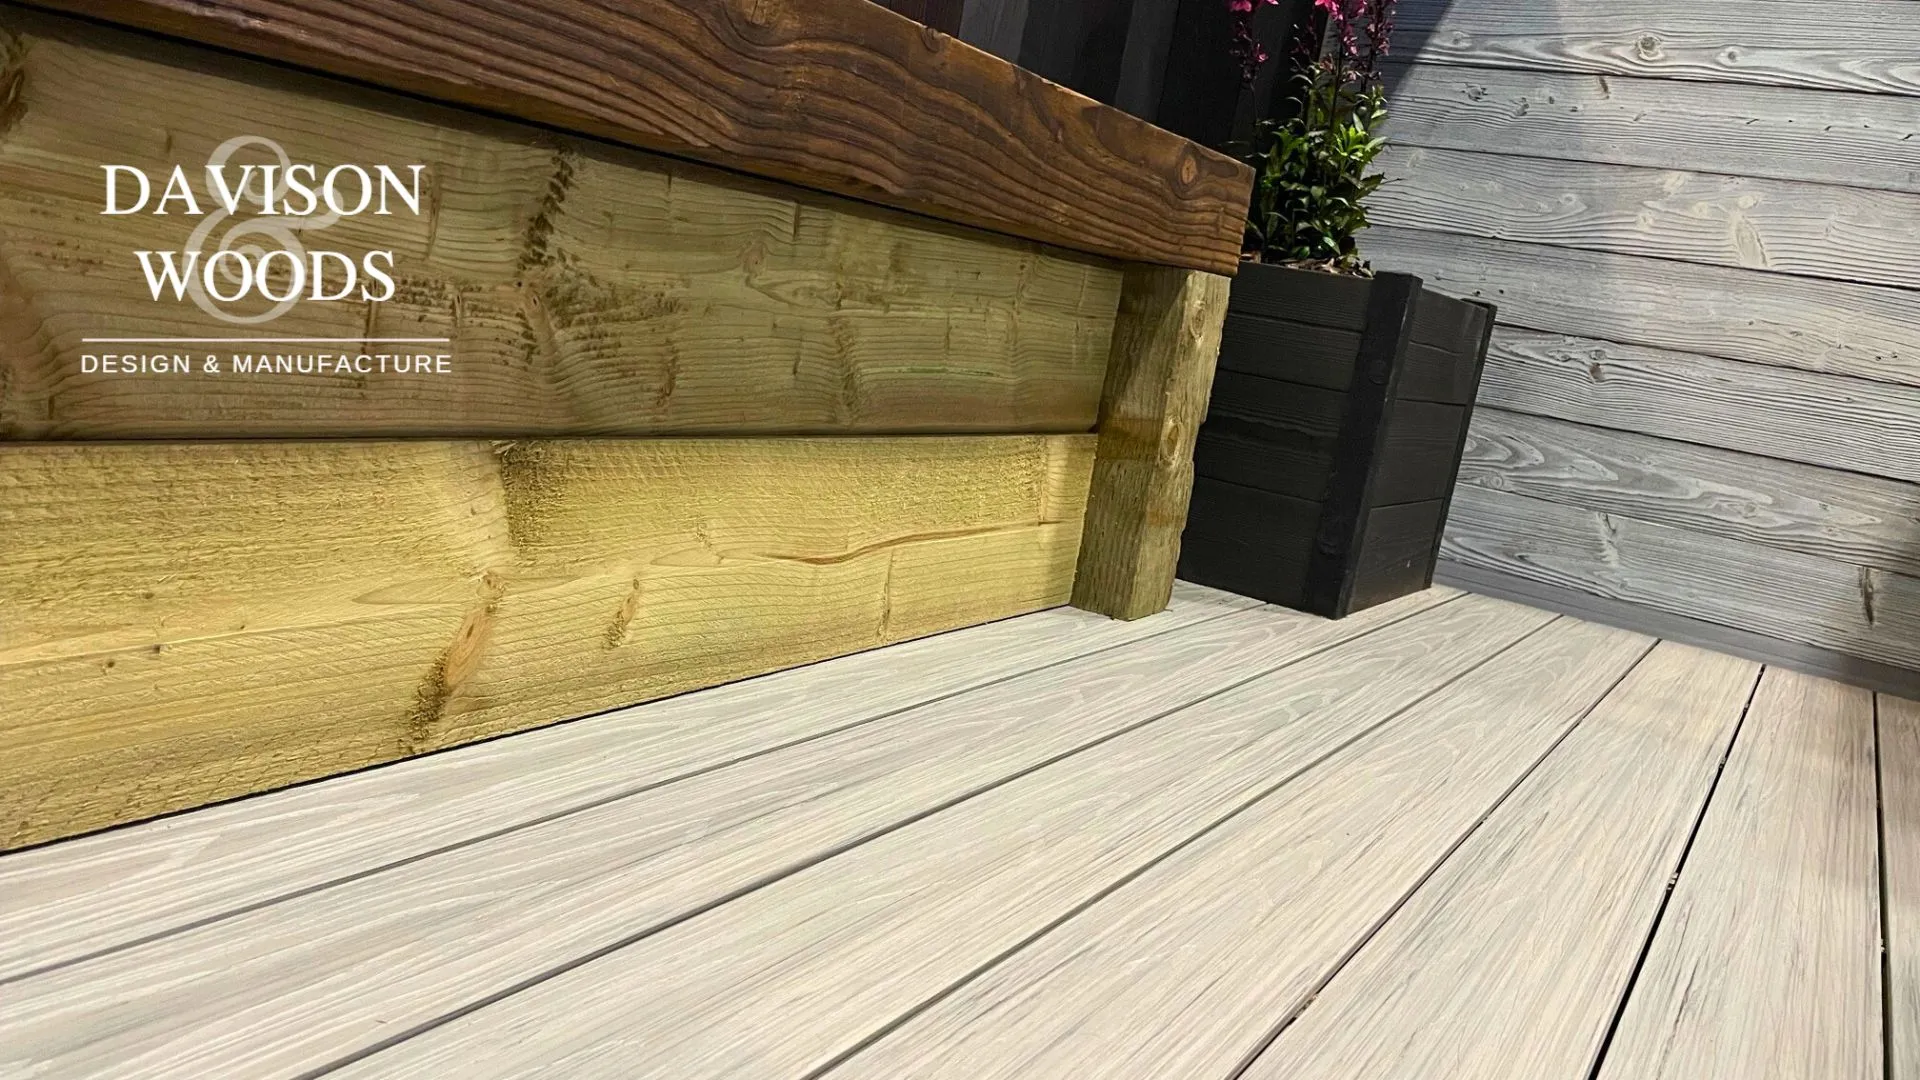 A BSW sleeper bench seat sits upon BSW decking in a close up shot highlighting the attractive wood colours and grain of each element.